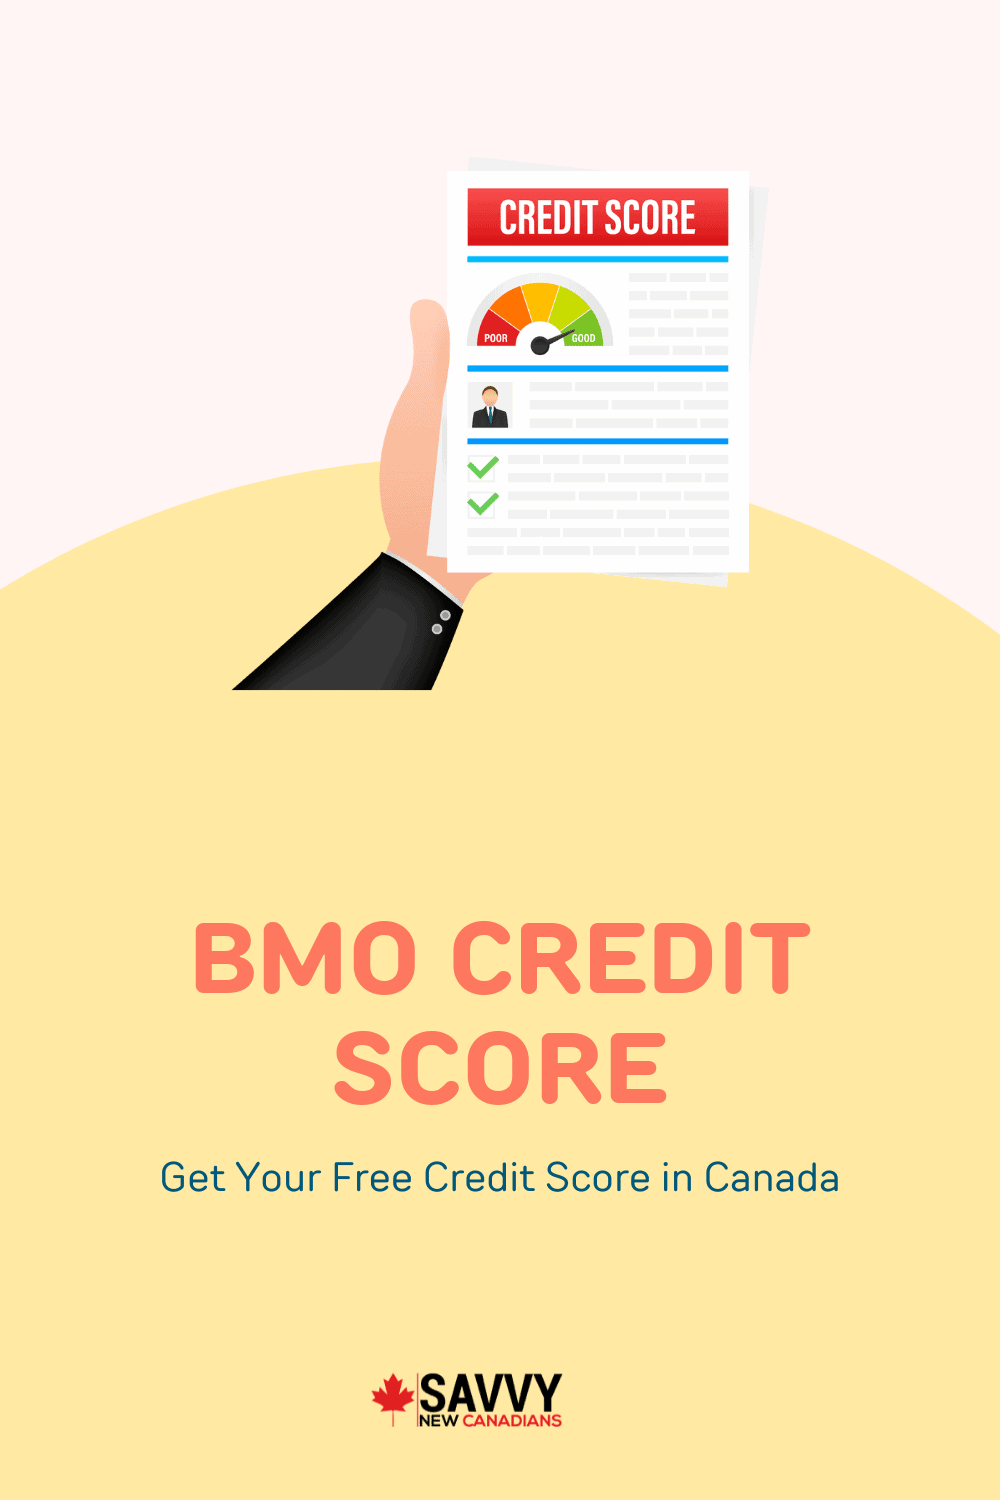 BMO Credit Score: How To Get Your Free Credit Score in 2022